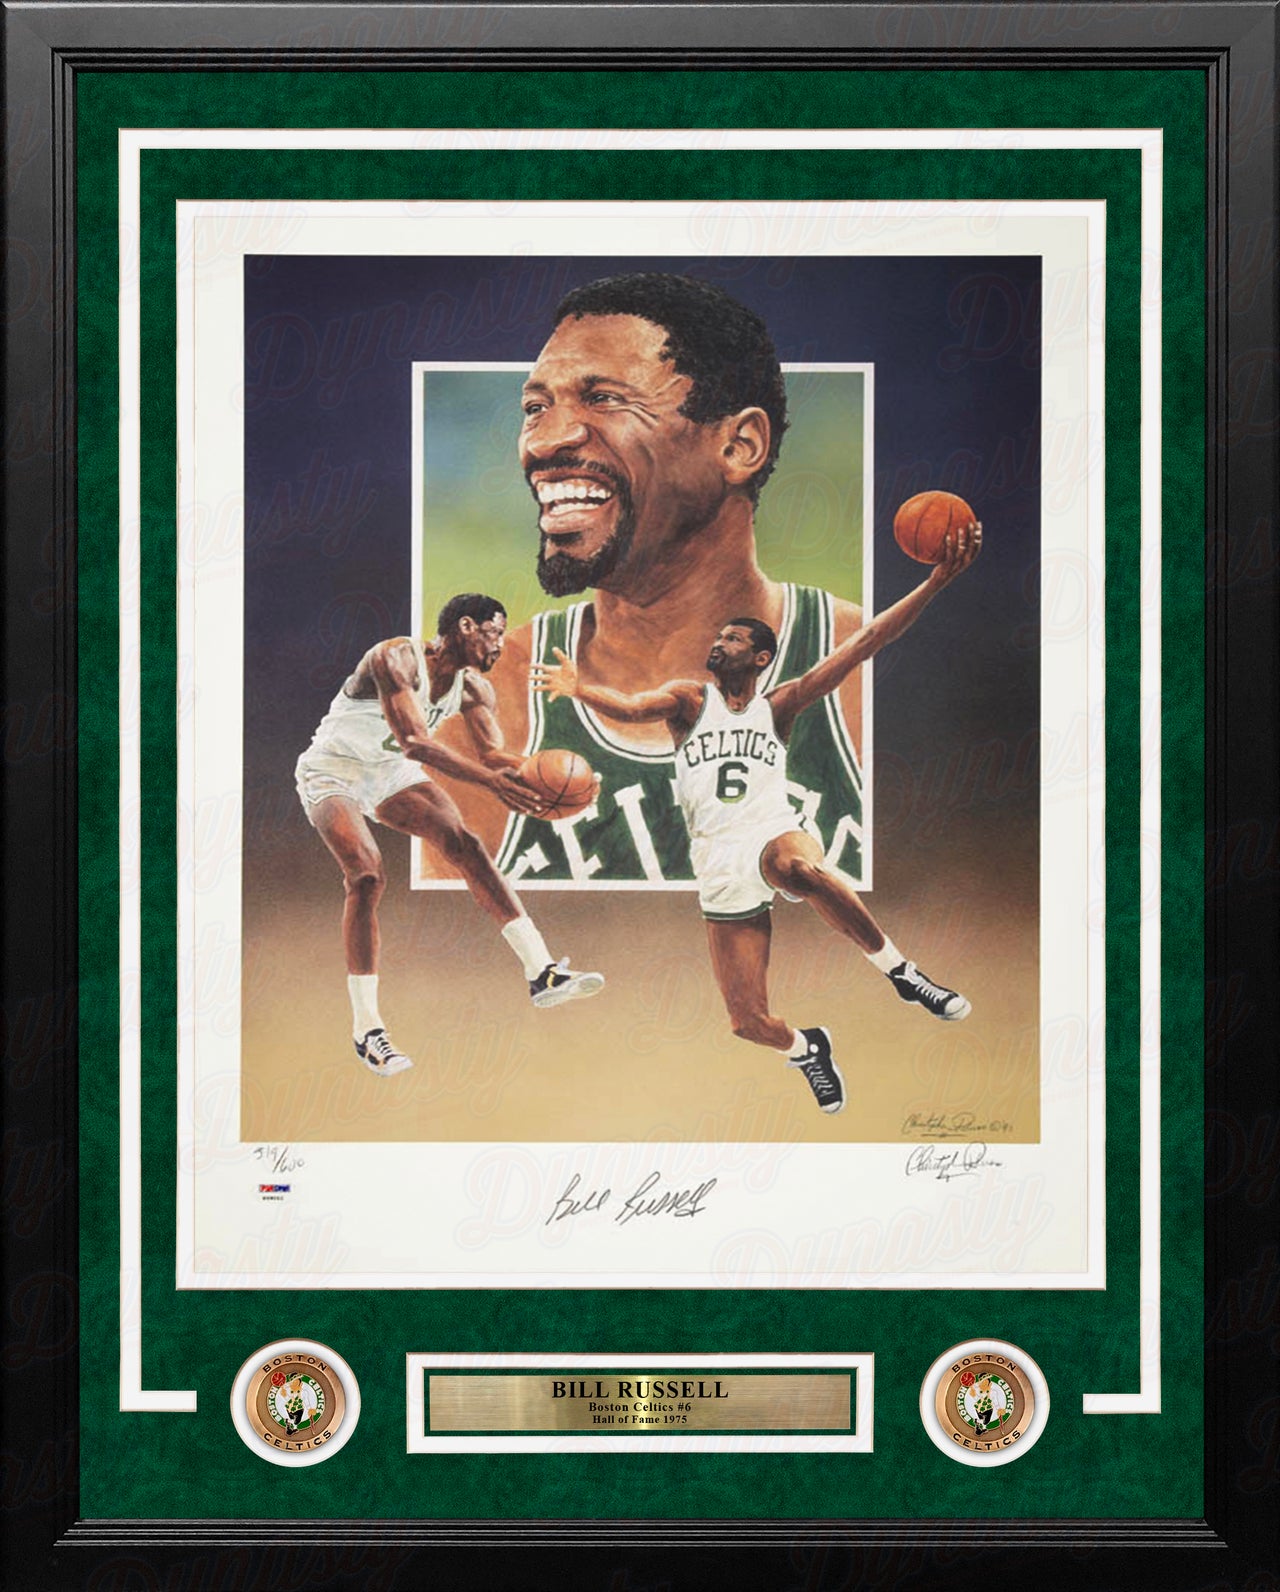 Bill Russell Boston Celtics Autographed 18x24 Framed Christopher Paluso Basketball Lithograph Photo - Dynasty Sports & Framing 